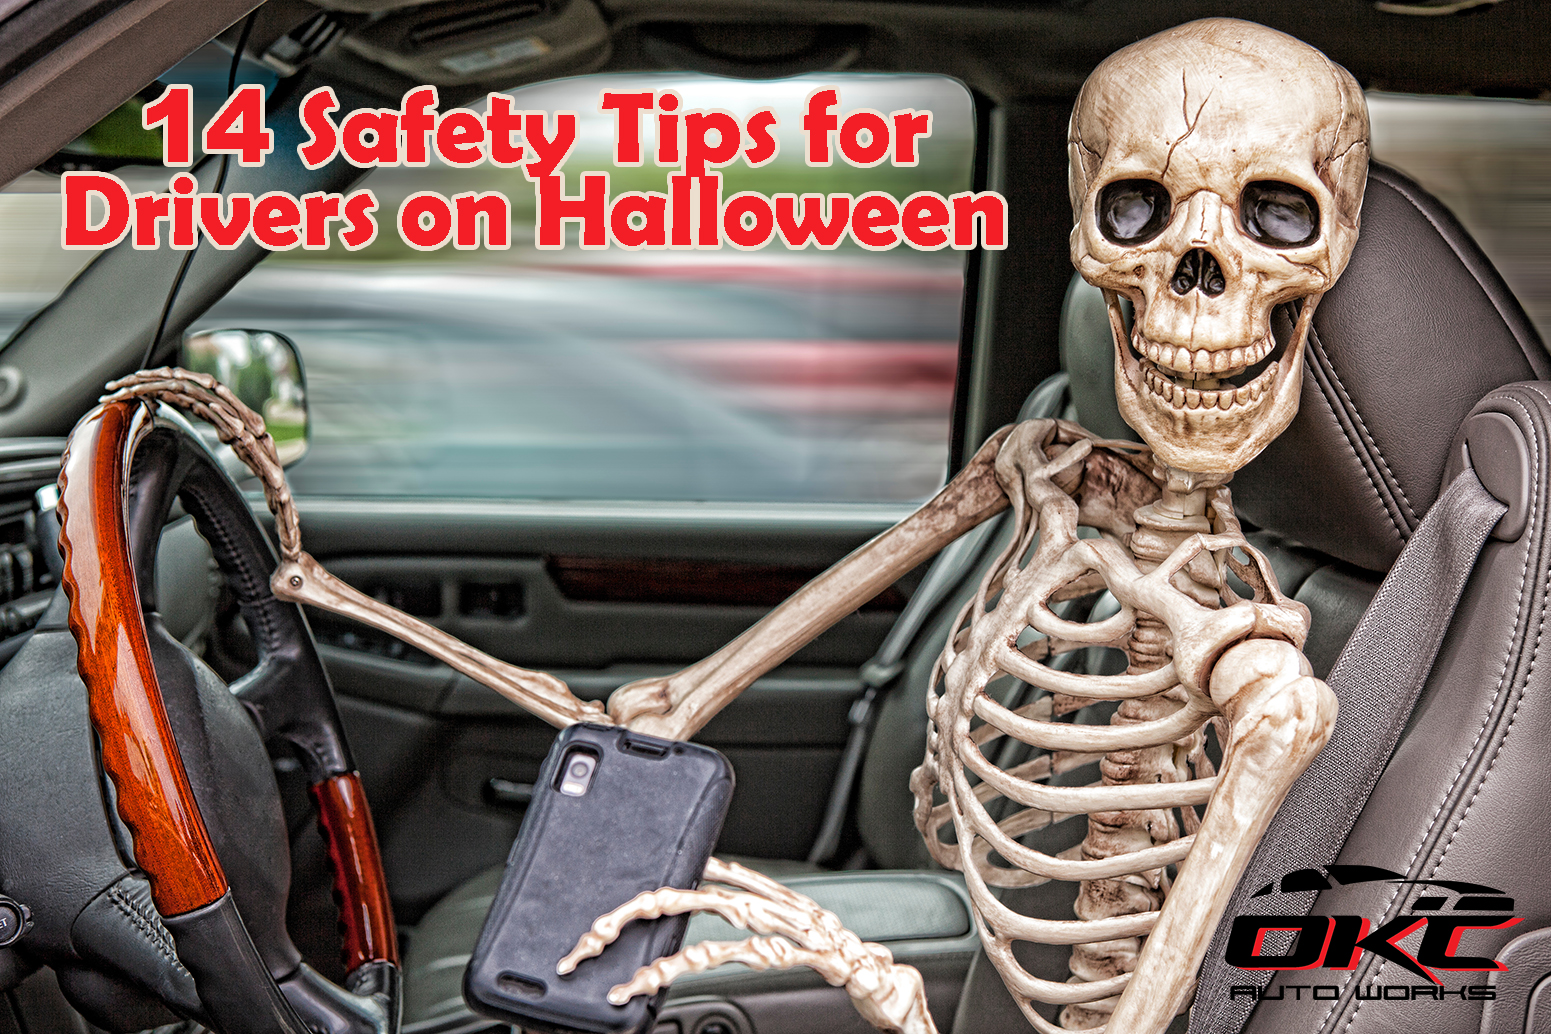 14 safety tips for drivers on Halloween